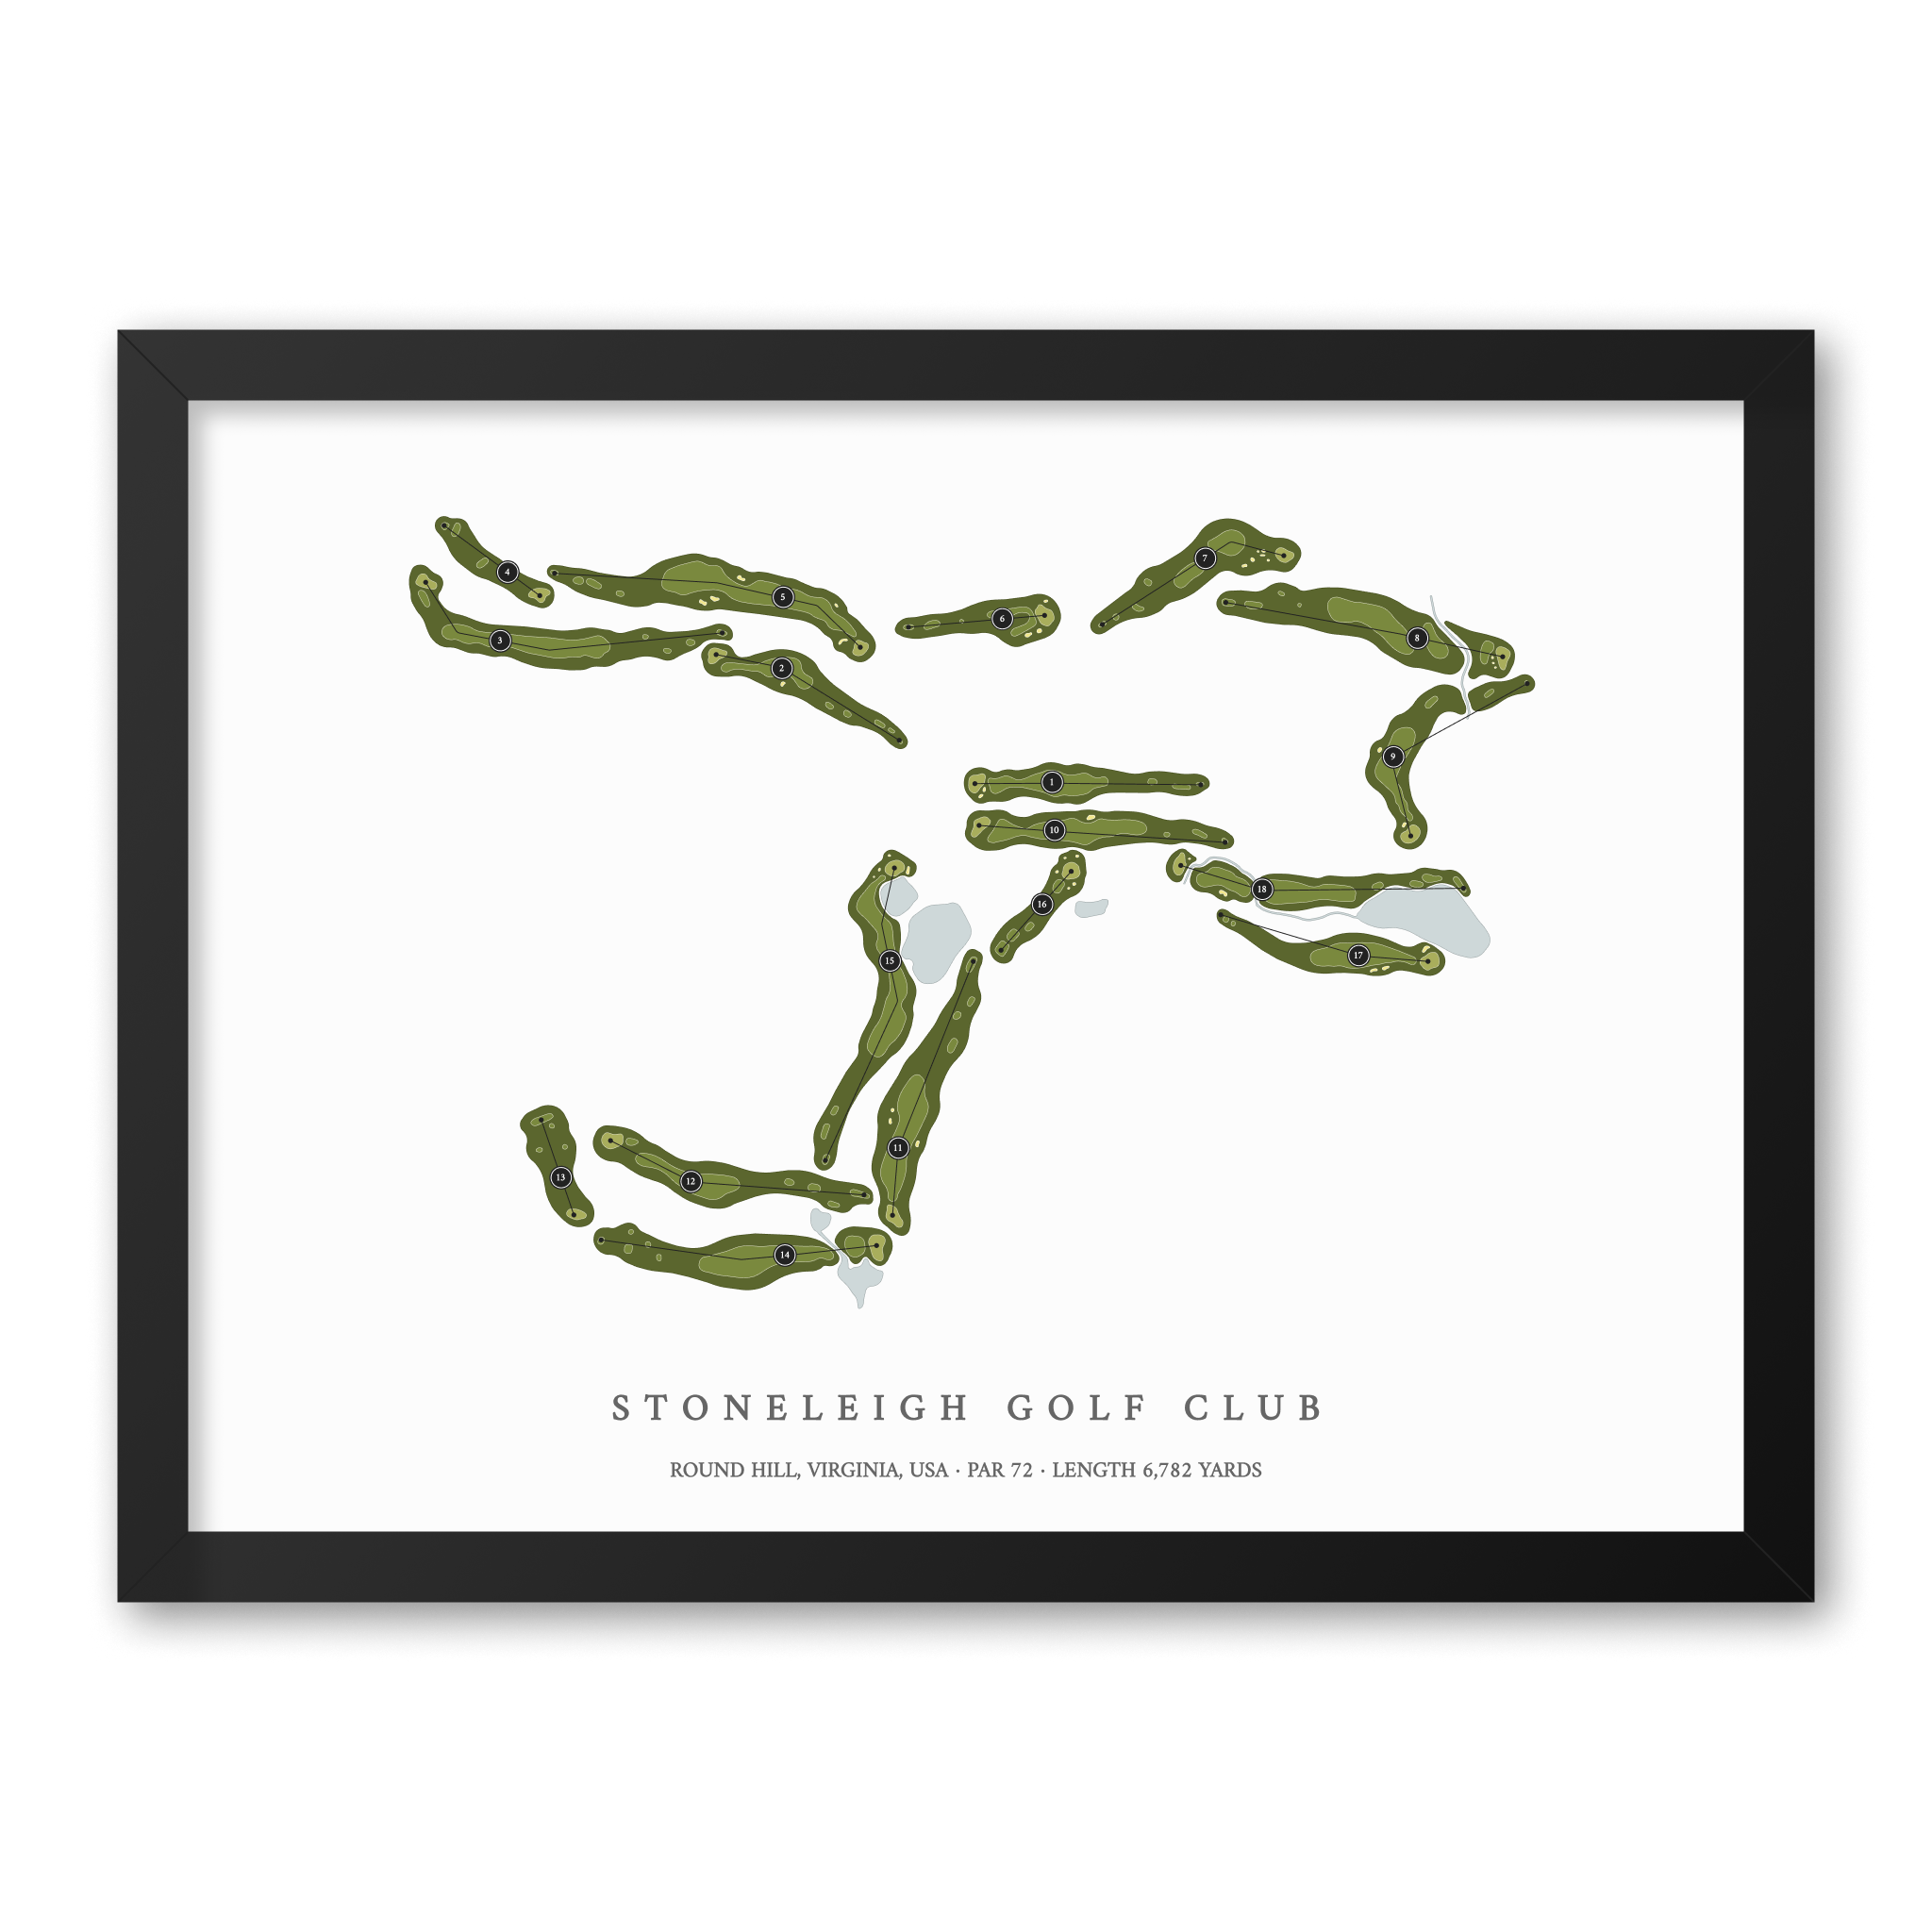 Stoneleigh Golf Club | Golf Course Map | Black Frame With Hole Numbers #hole numbers_yes